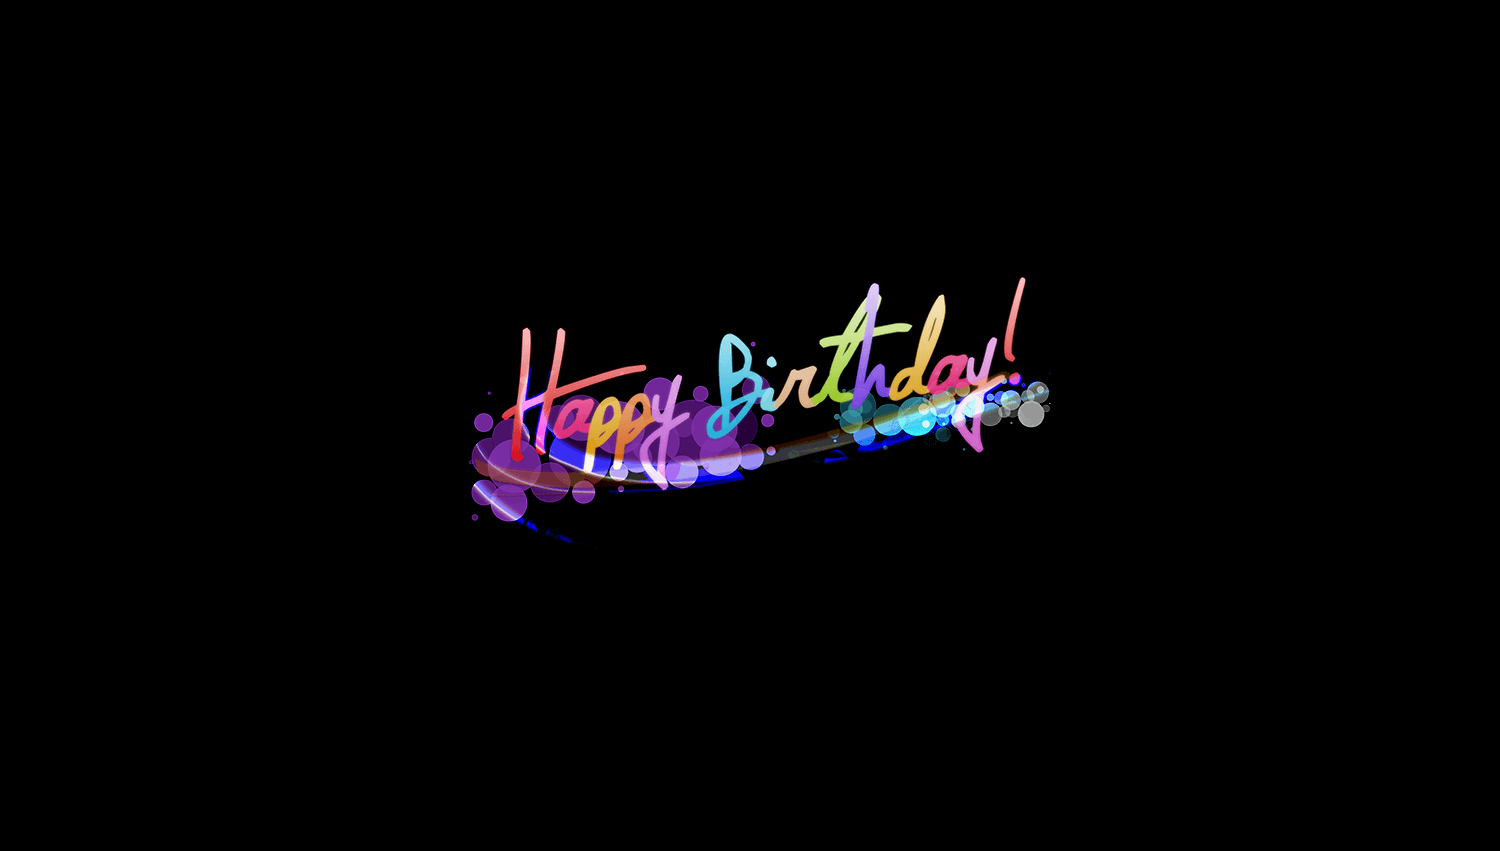 Wallpapers Of Happy Birthday